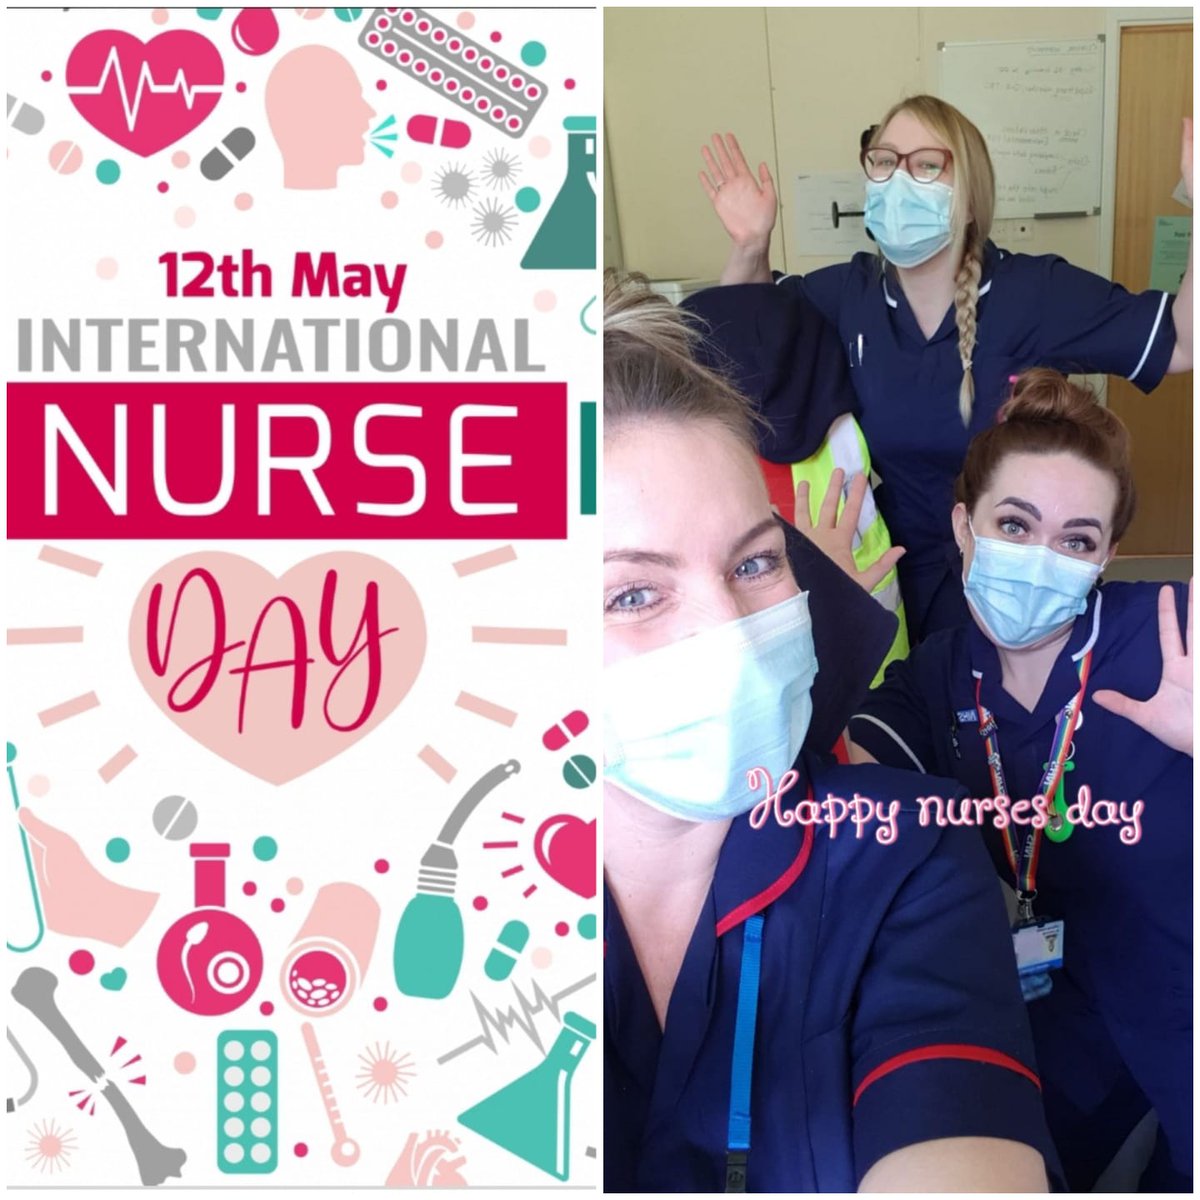 Happy nurses day to all my amazing colleagues ❤😊